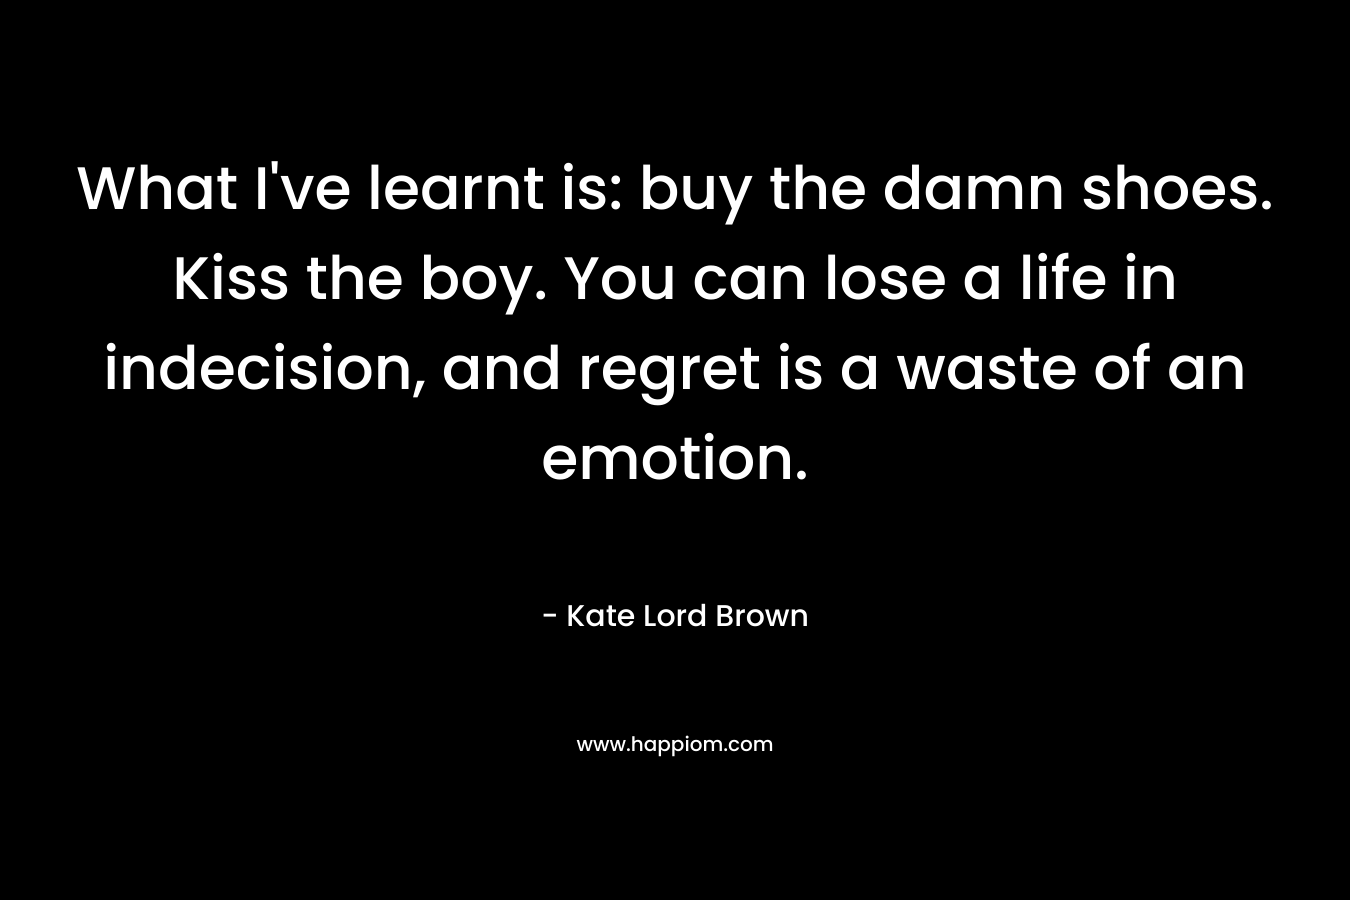 What I’ve learnt is: buy the damn shoes. Kiss the boy. You can lose a life in indecision, and regret is a waste of an emotion. – Kate Lord Brown